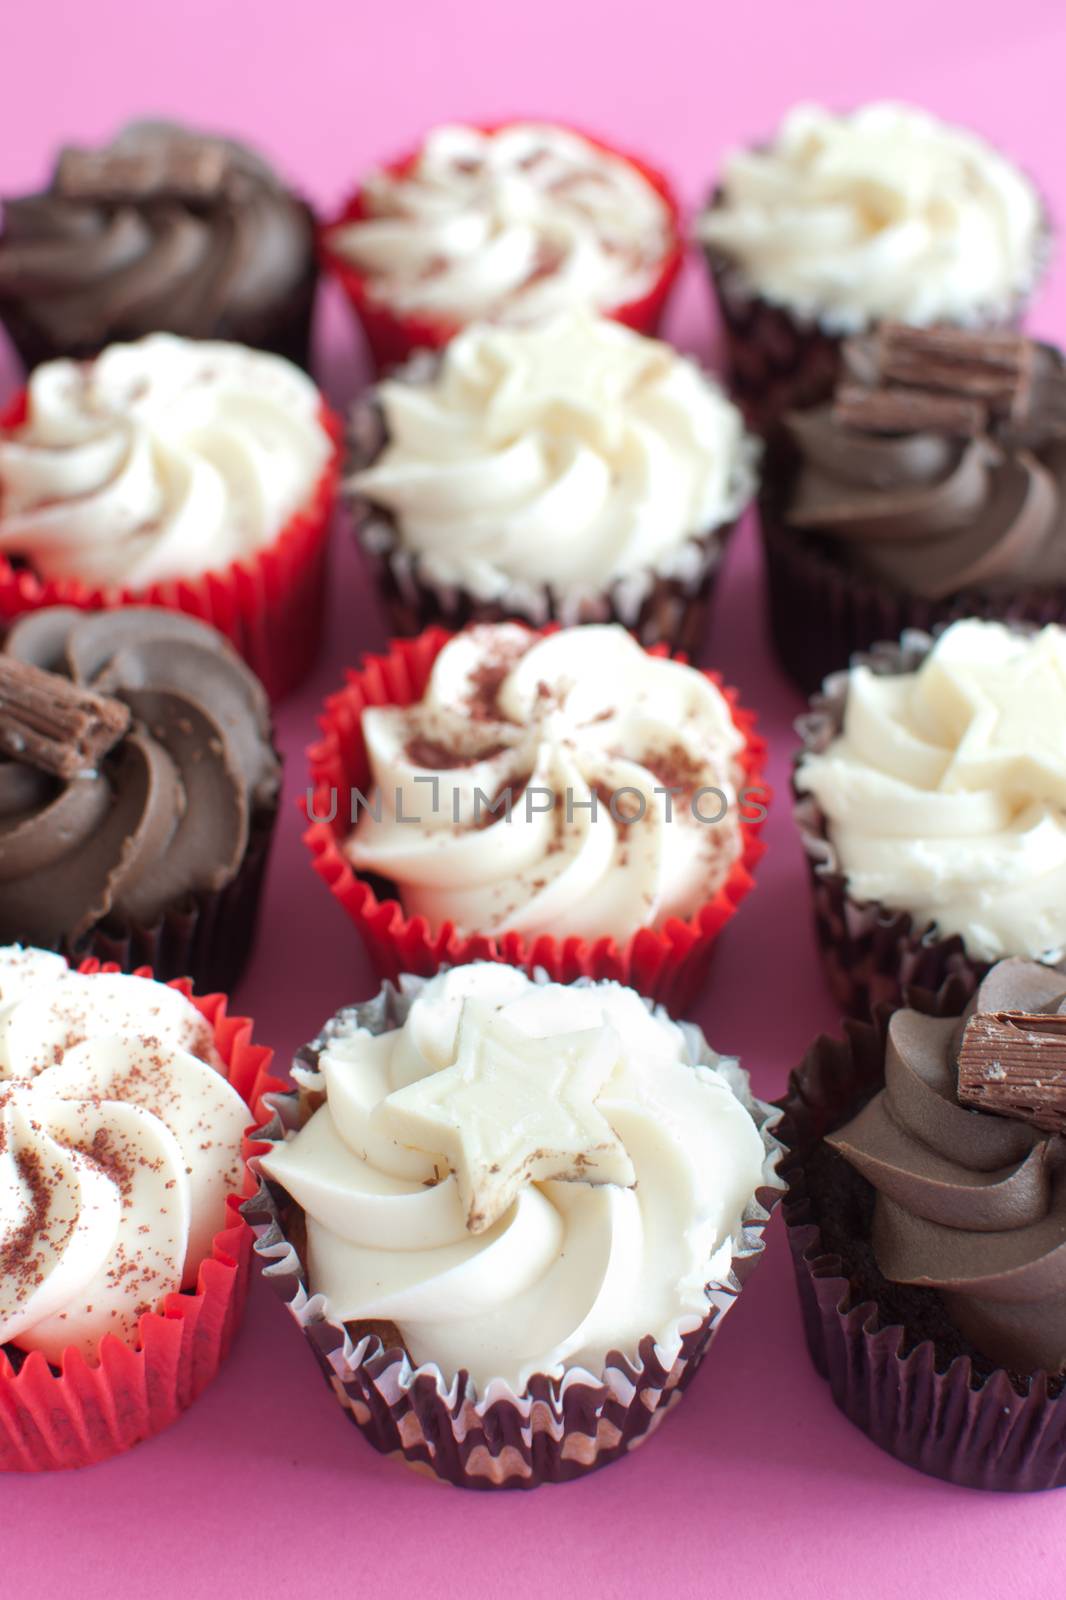 Array of cupcakes with chocolate and cream